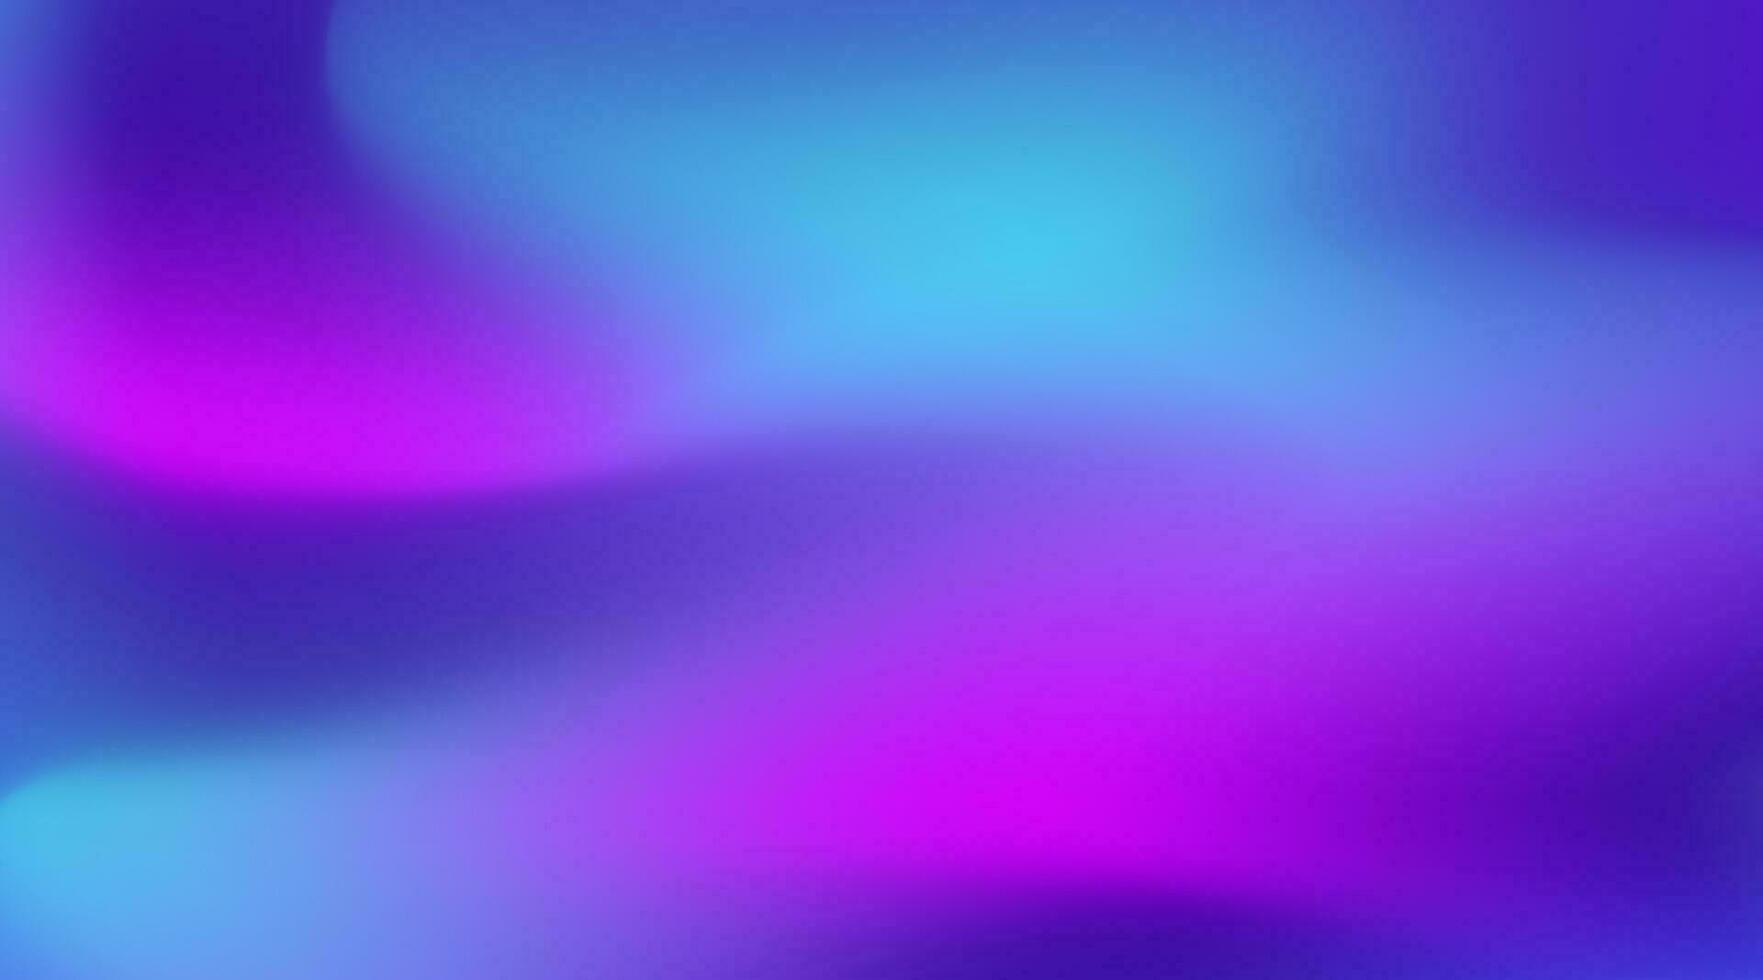 Abstract blurred gradient blue  background with bright colors. Colorful smooth illustrations, for your graphic design, template, wallpaper, banner, poster or website vector